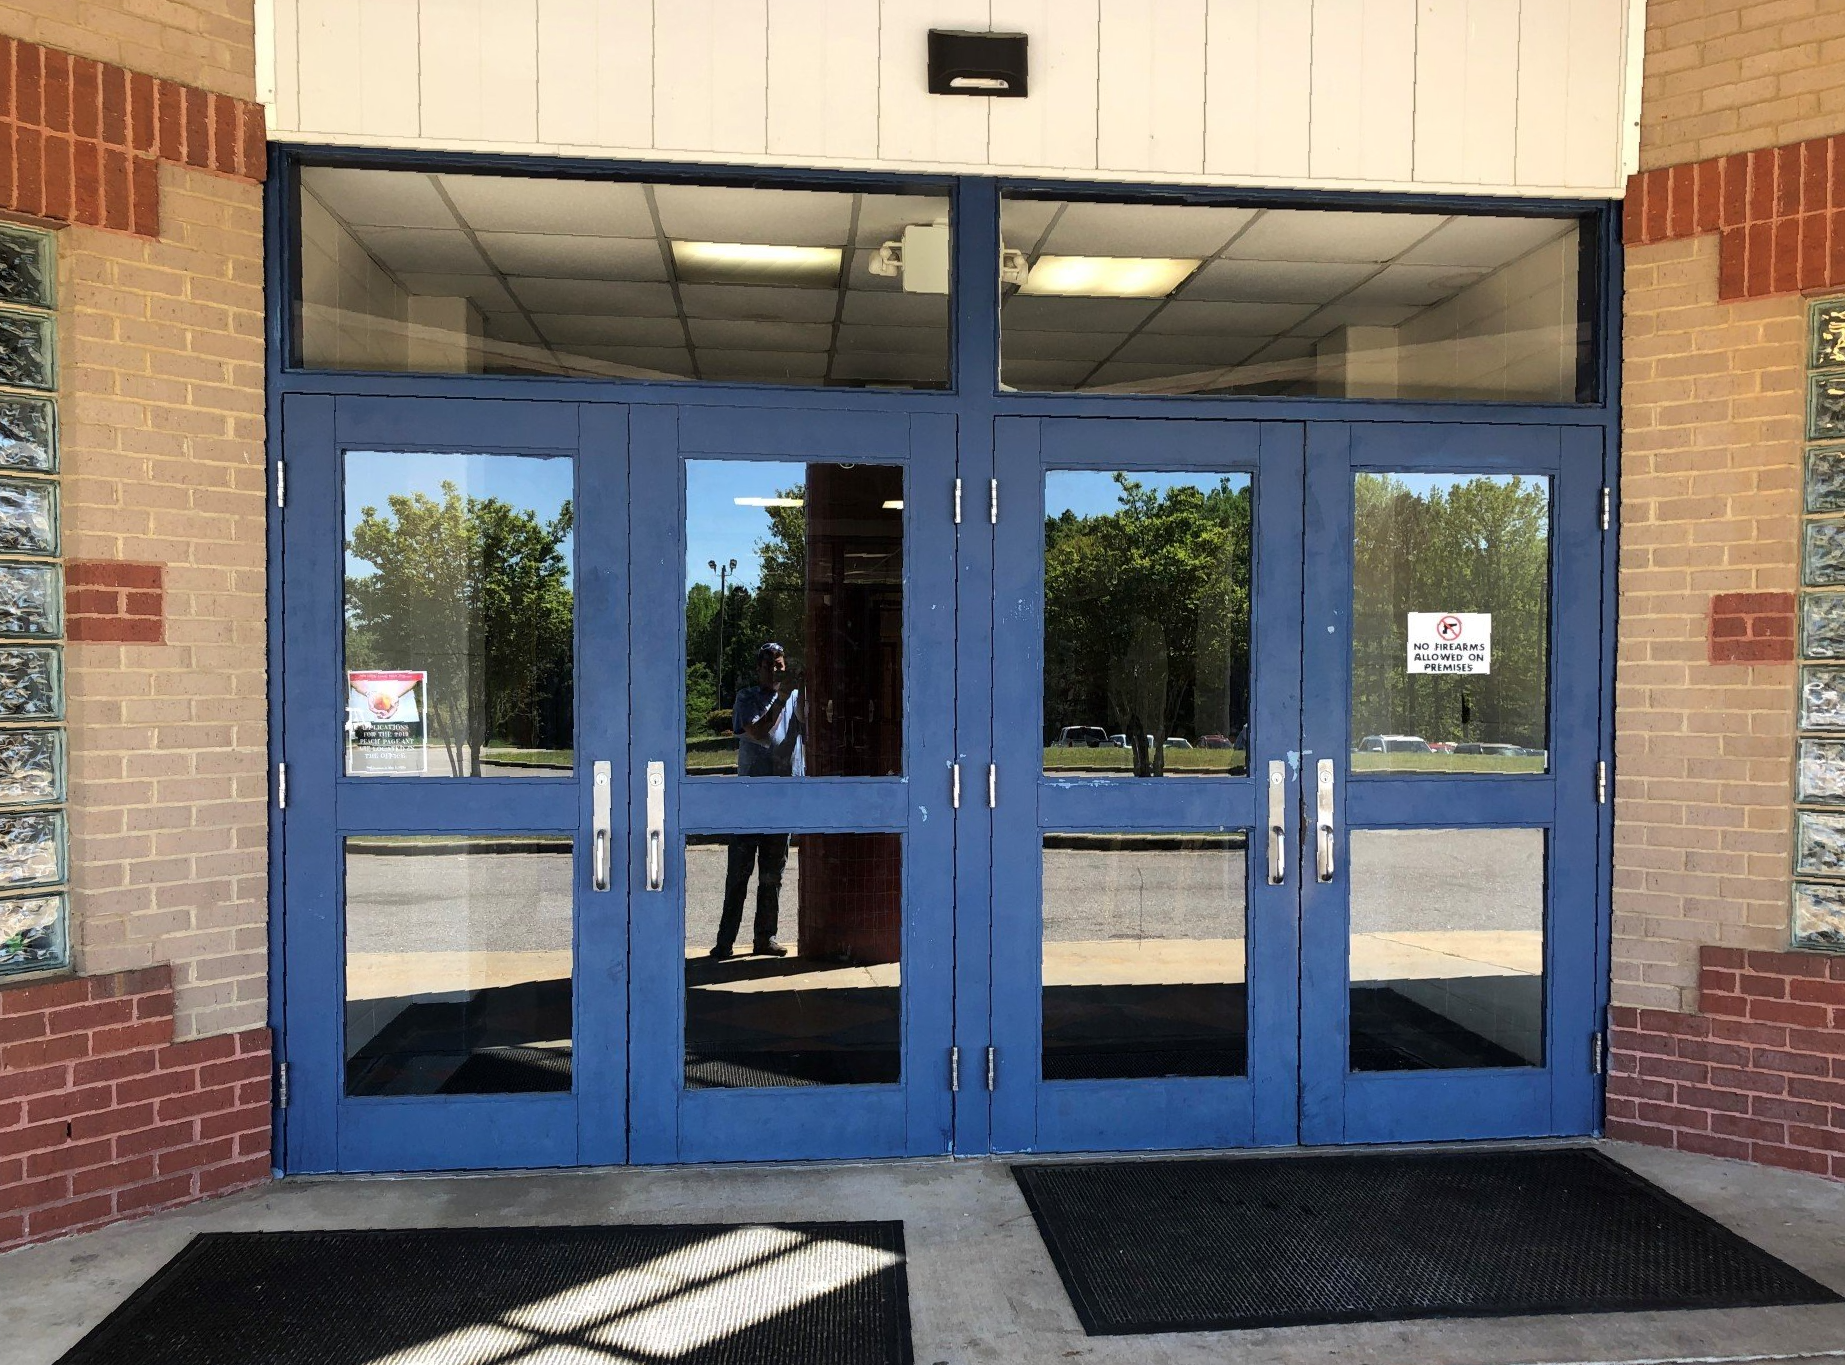 Before SPF Tint installation to the glass doors at Jemison Elementary School on 4/15/2019.